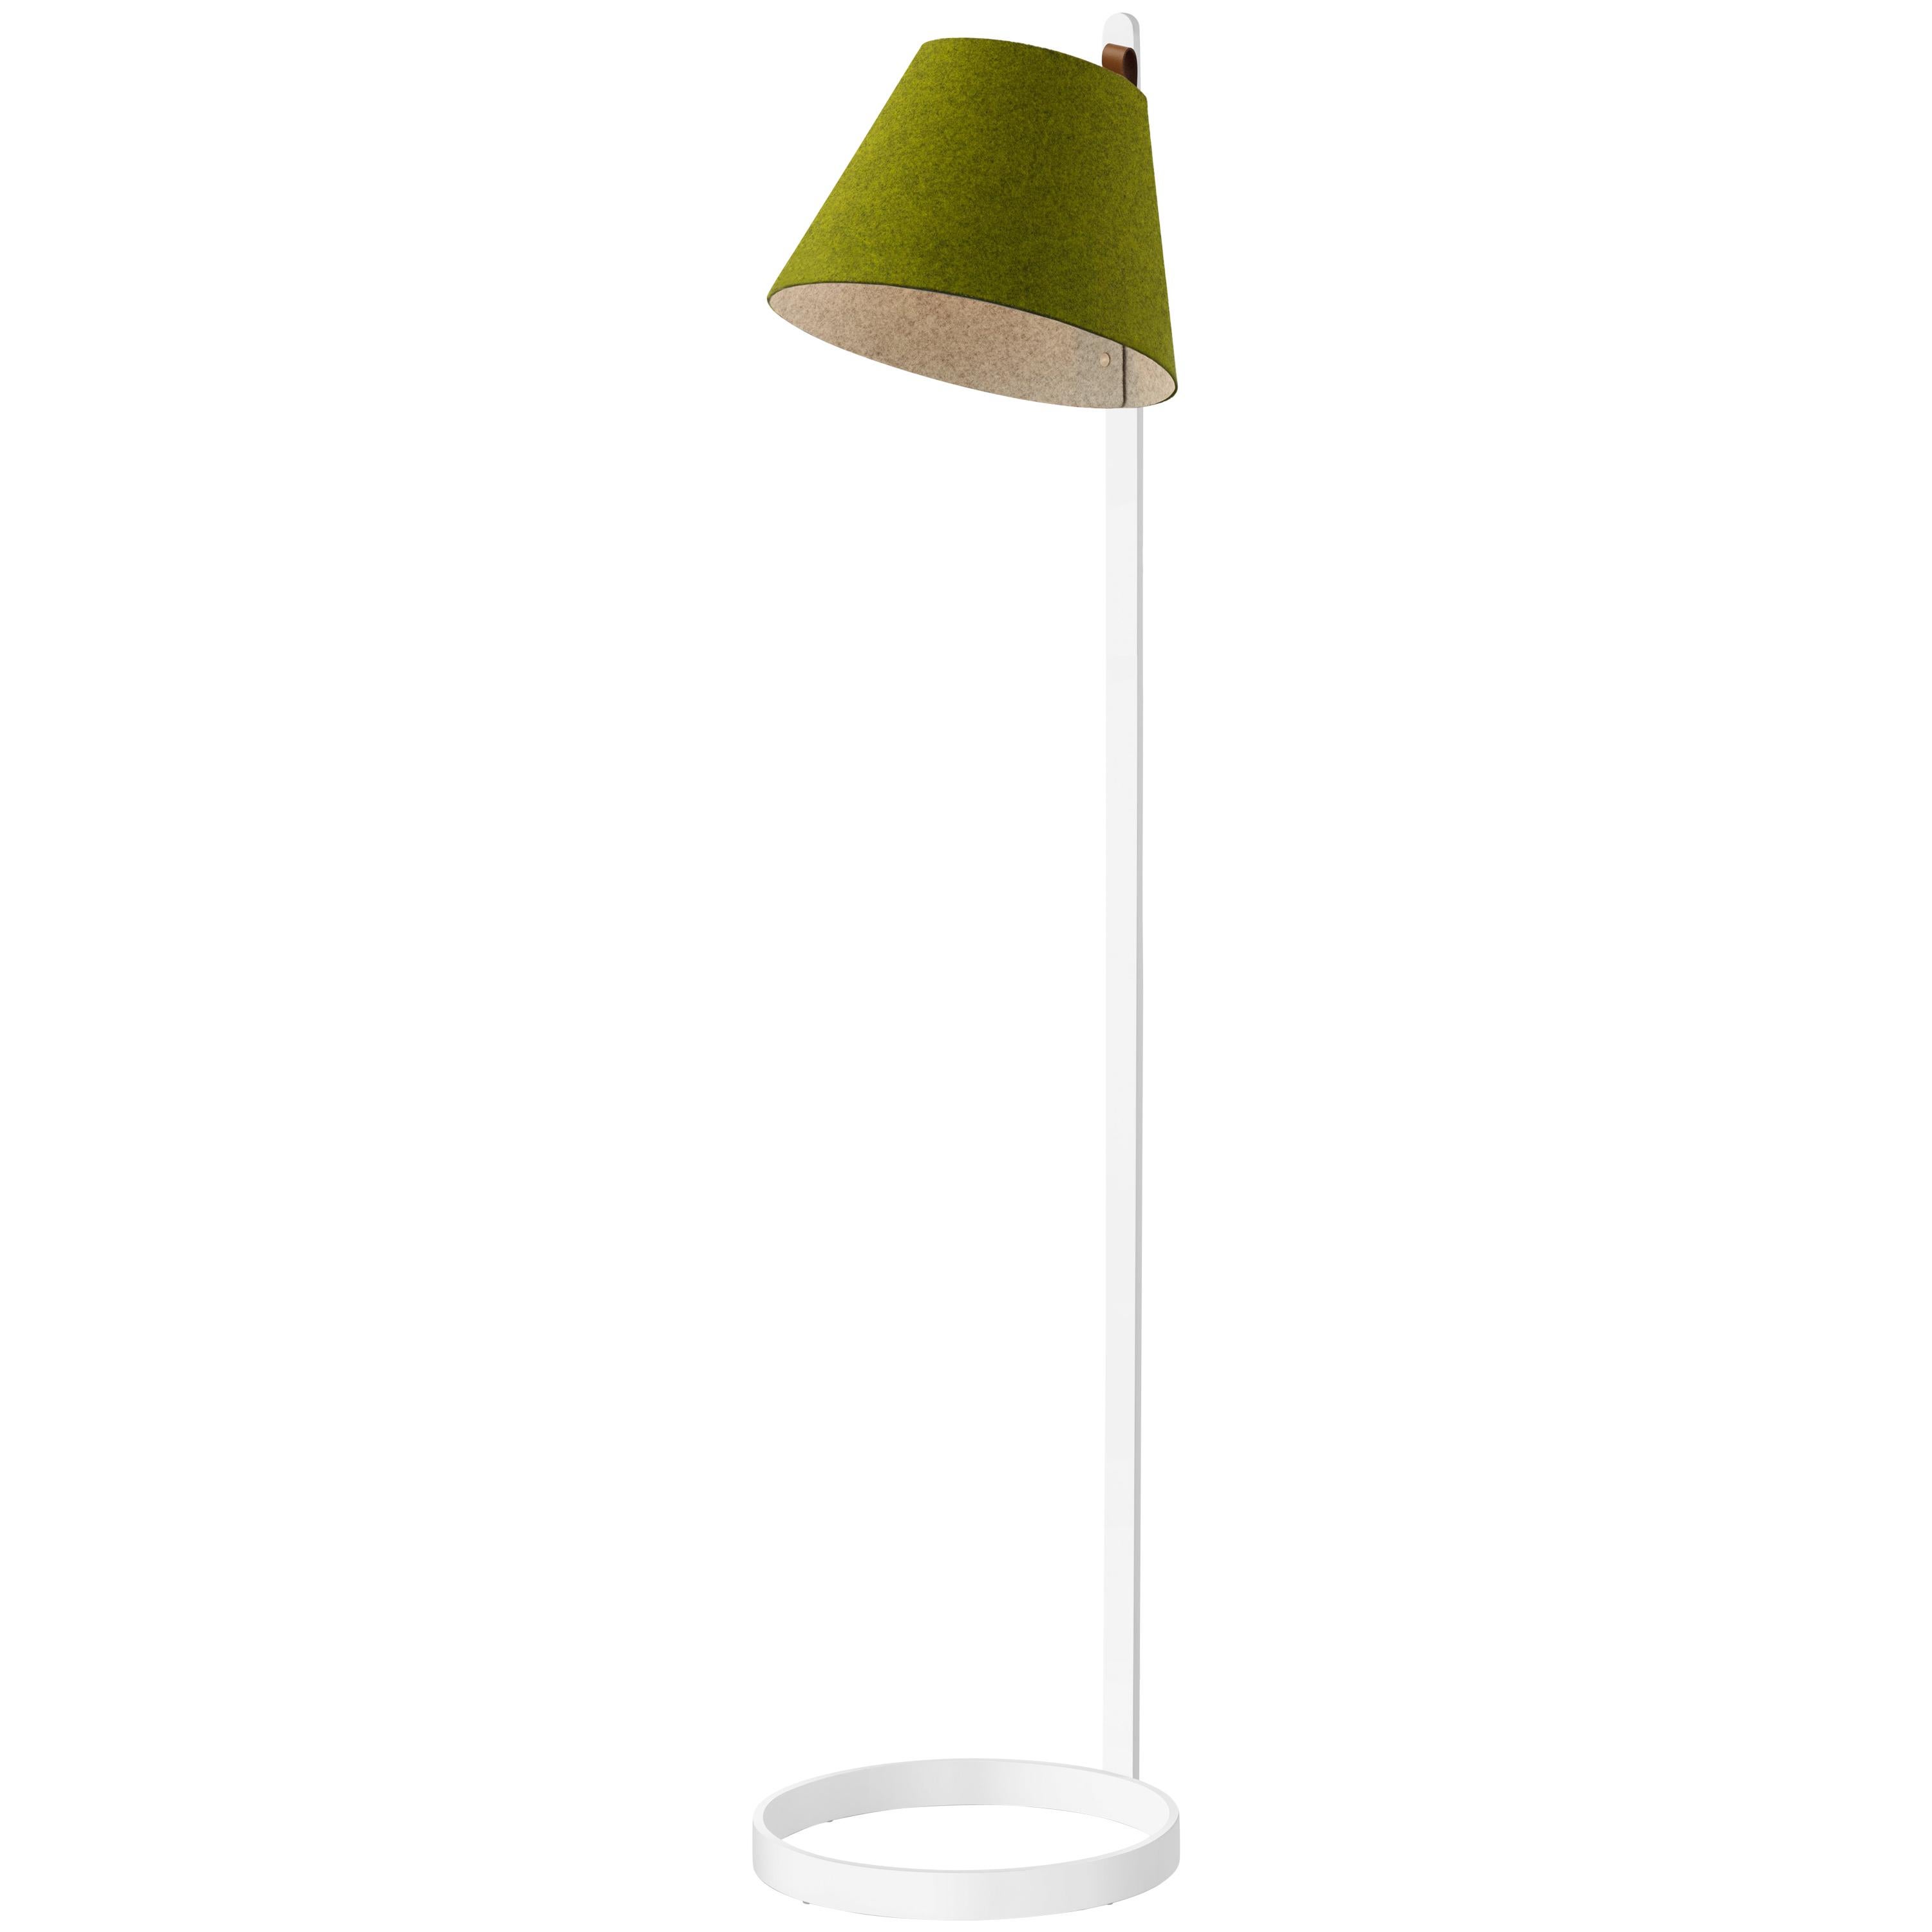 Lana Floor Lamp in Moss and Grey with White Base by Pablo Designs